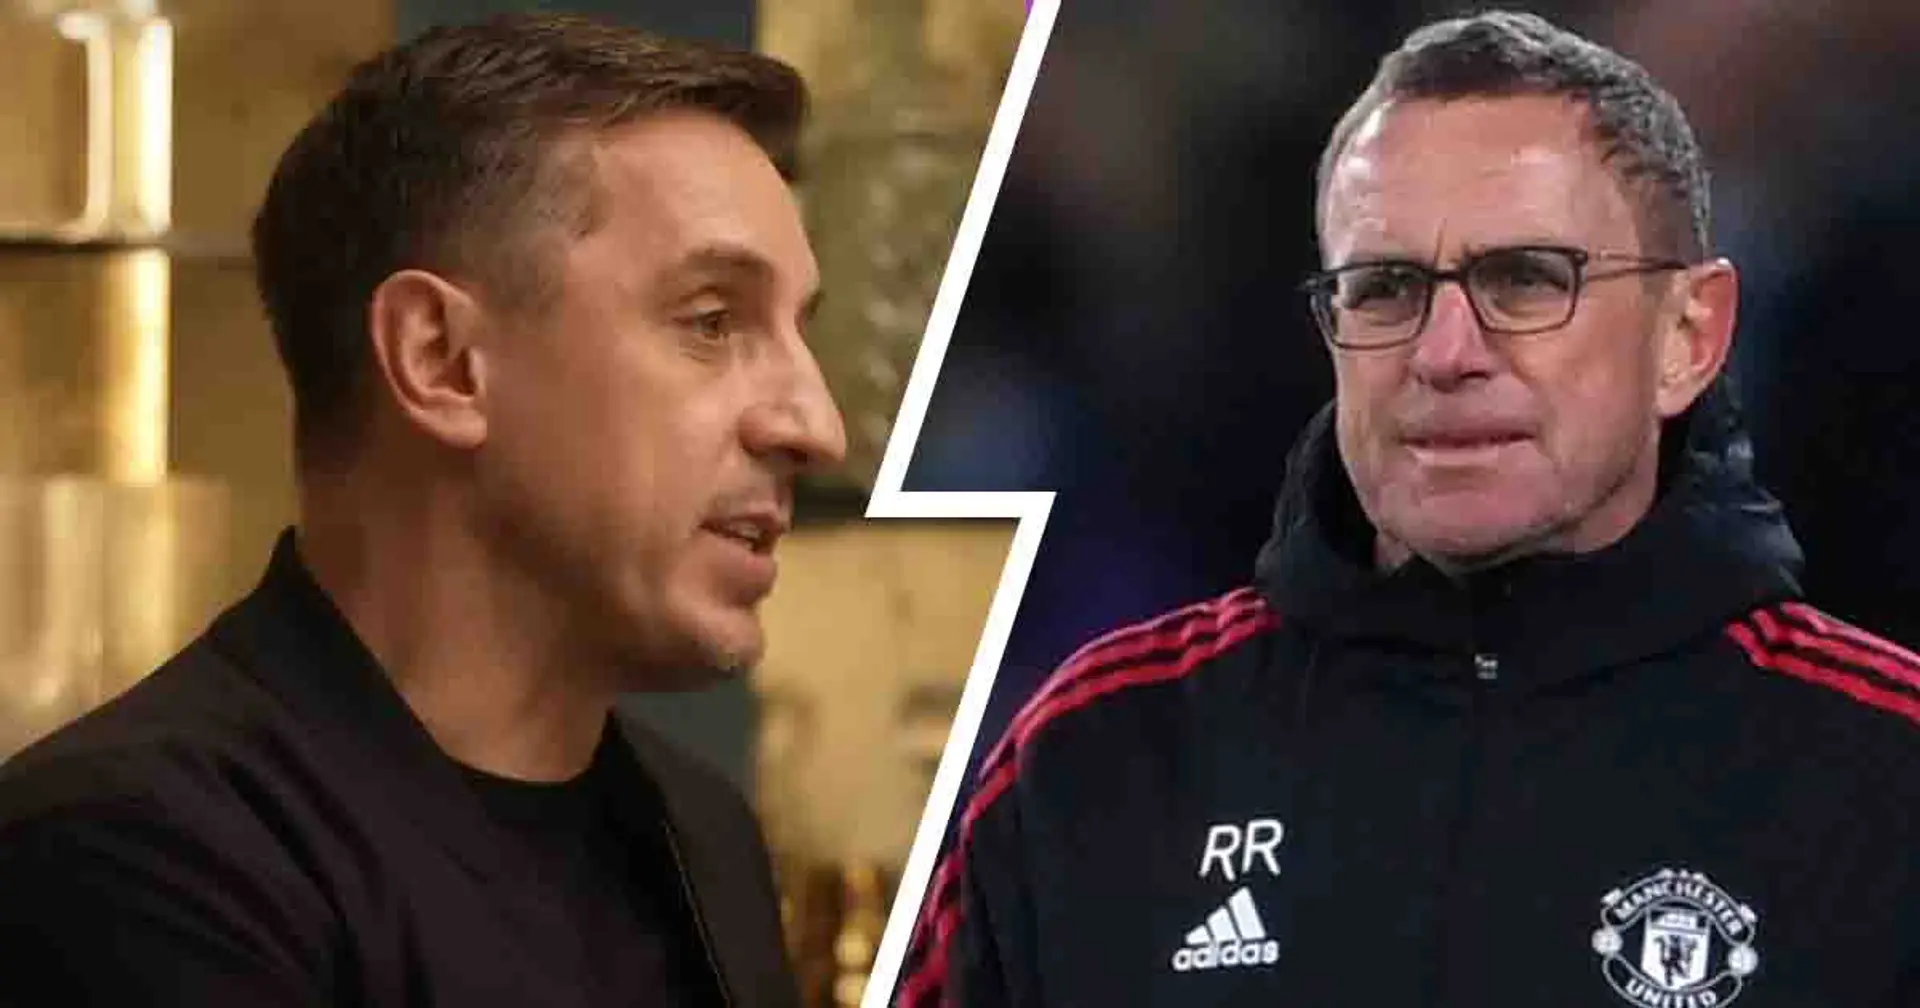 'Scared them to death': Gary Neville explains theory of why Glazers fired Ralf Rangnick